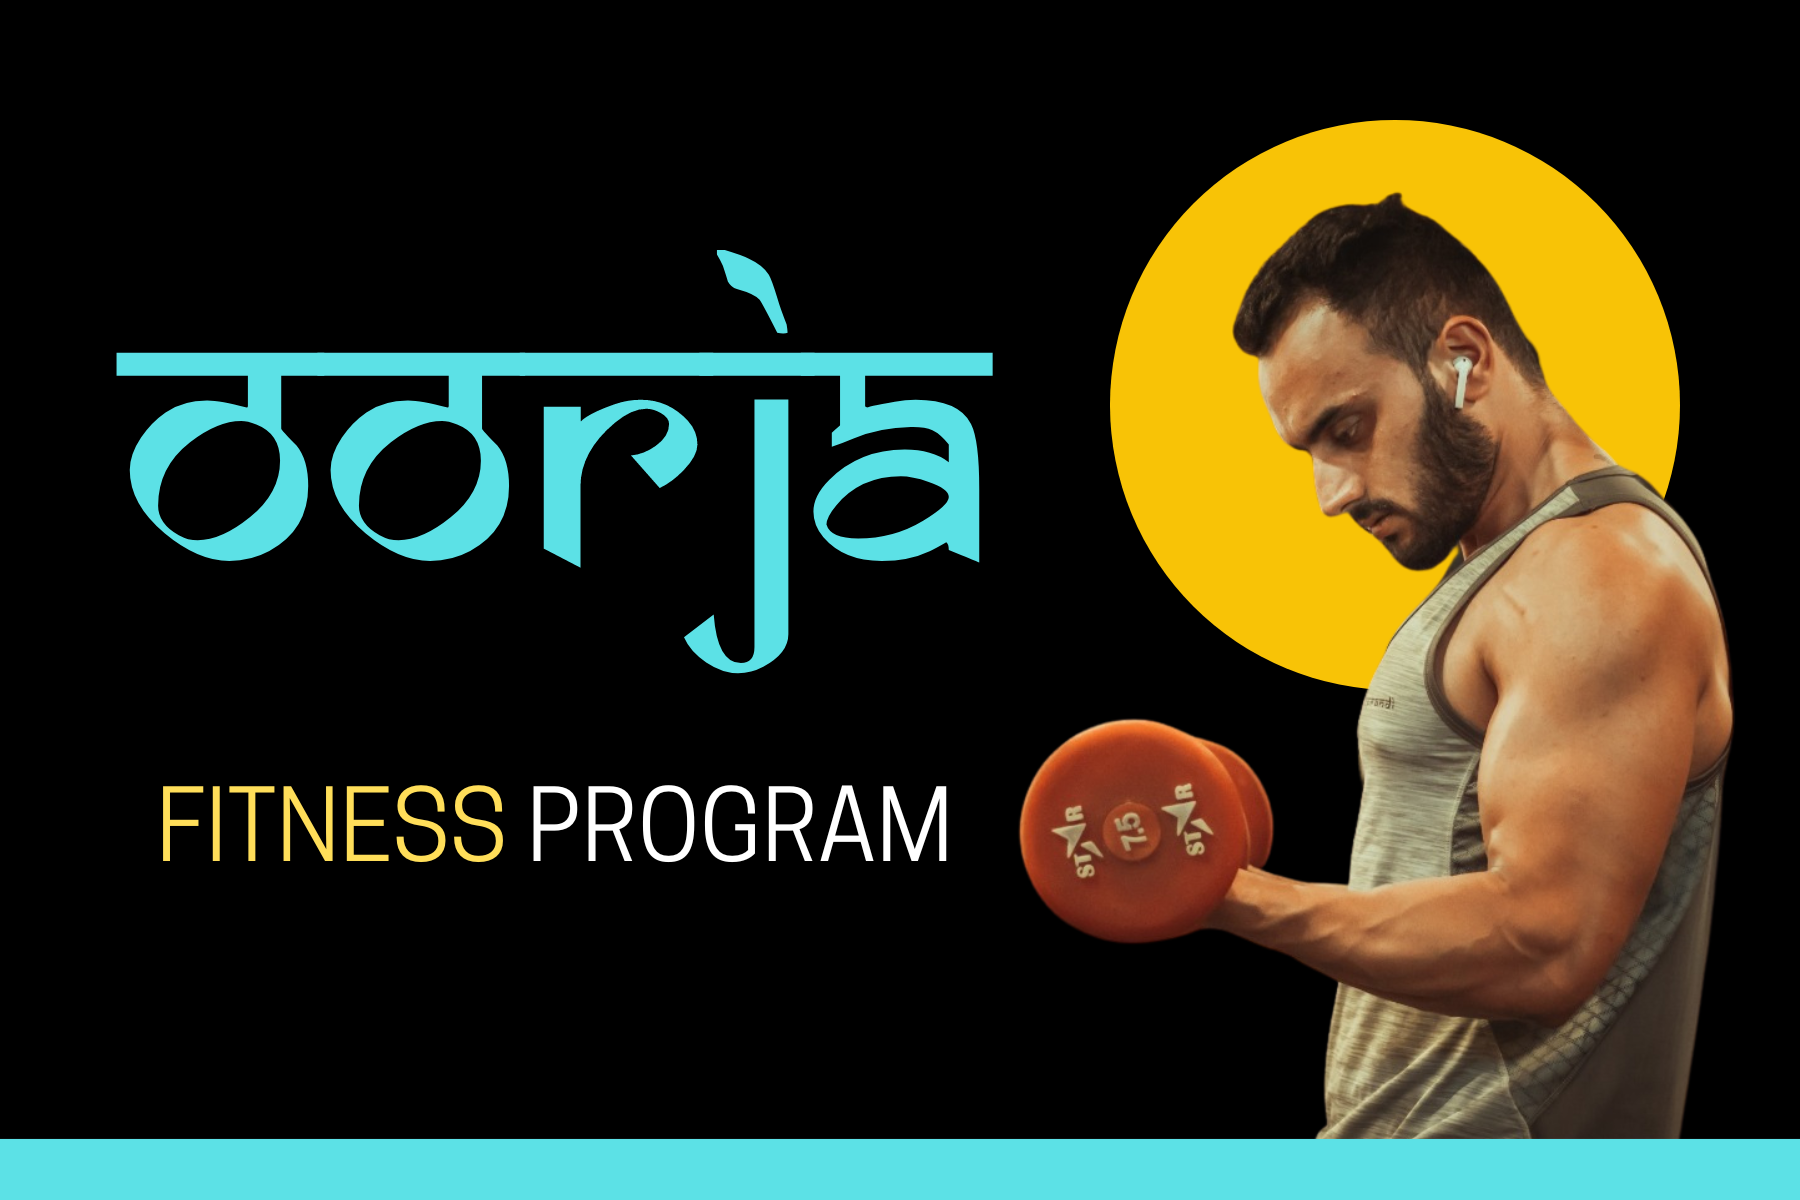 A Indian man lifting dumbbells while trying to do bicep curls to promote healthy lifestyle as a part of a personalised fitness program 